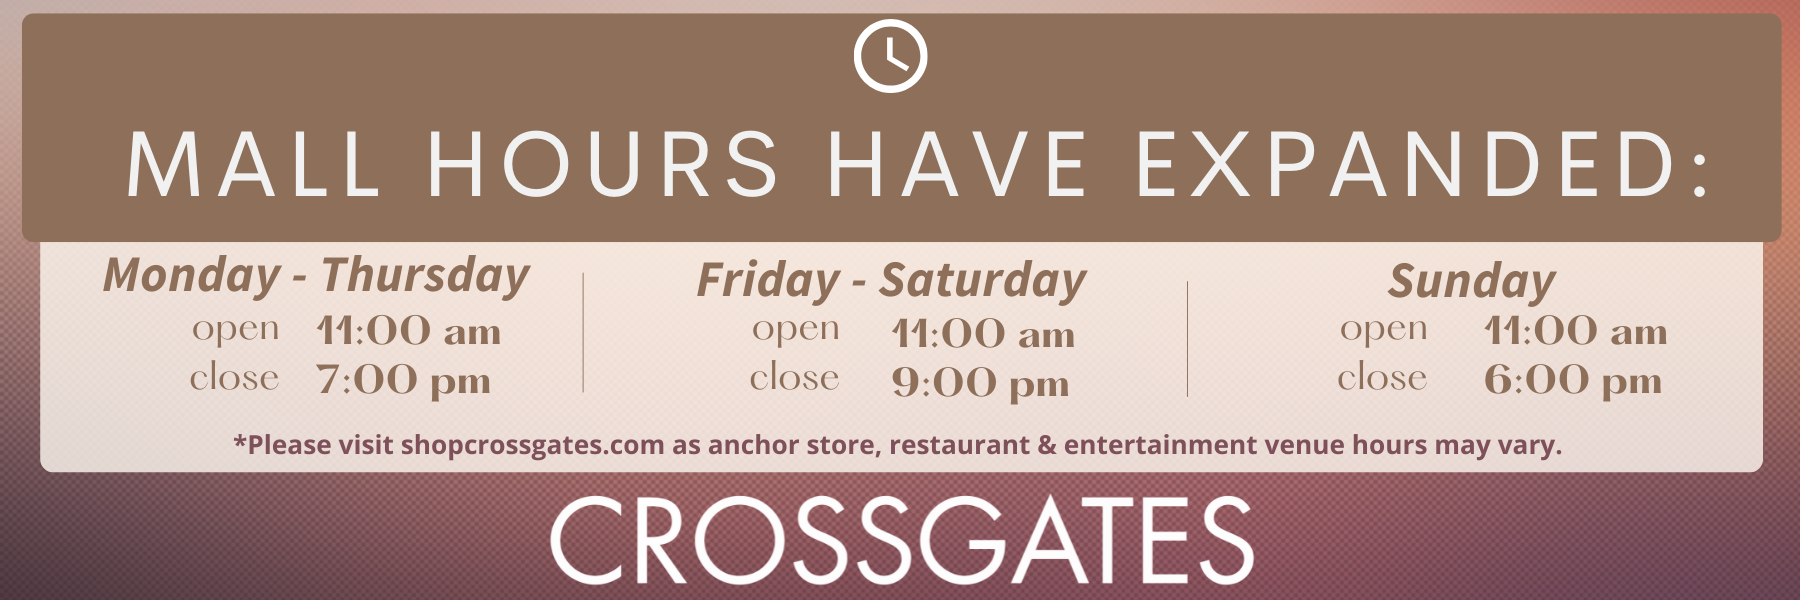 Mall Hours Have Expanded 1800 600 px